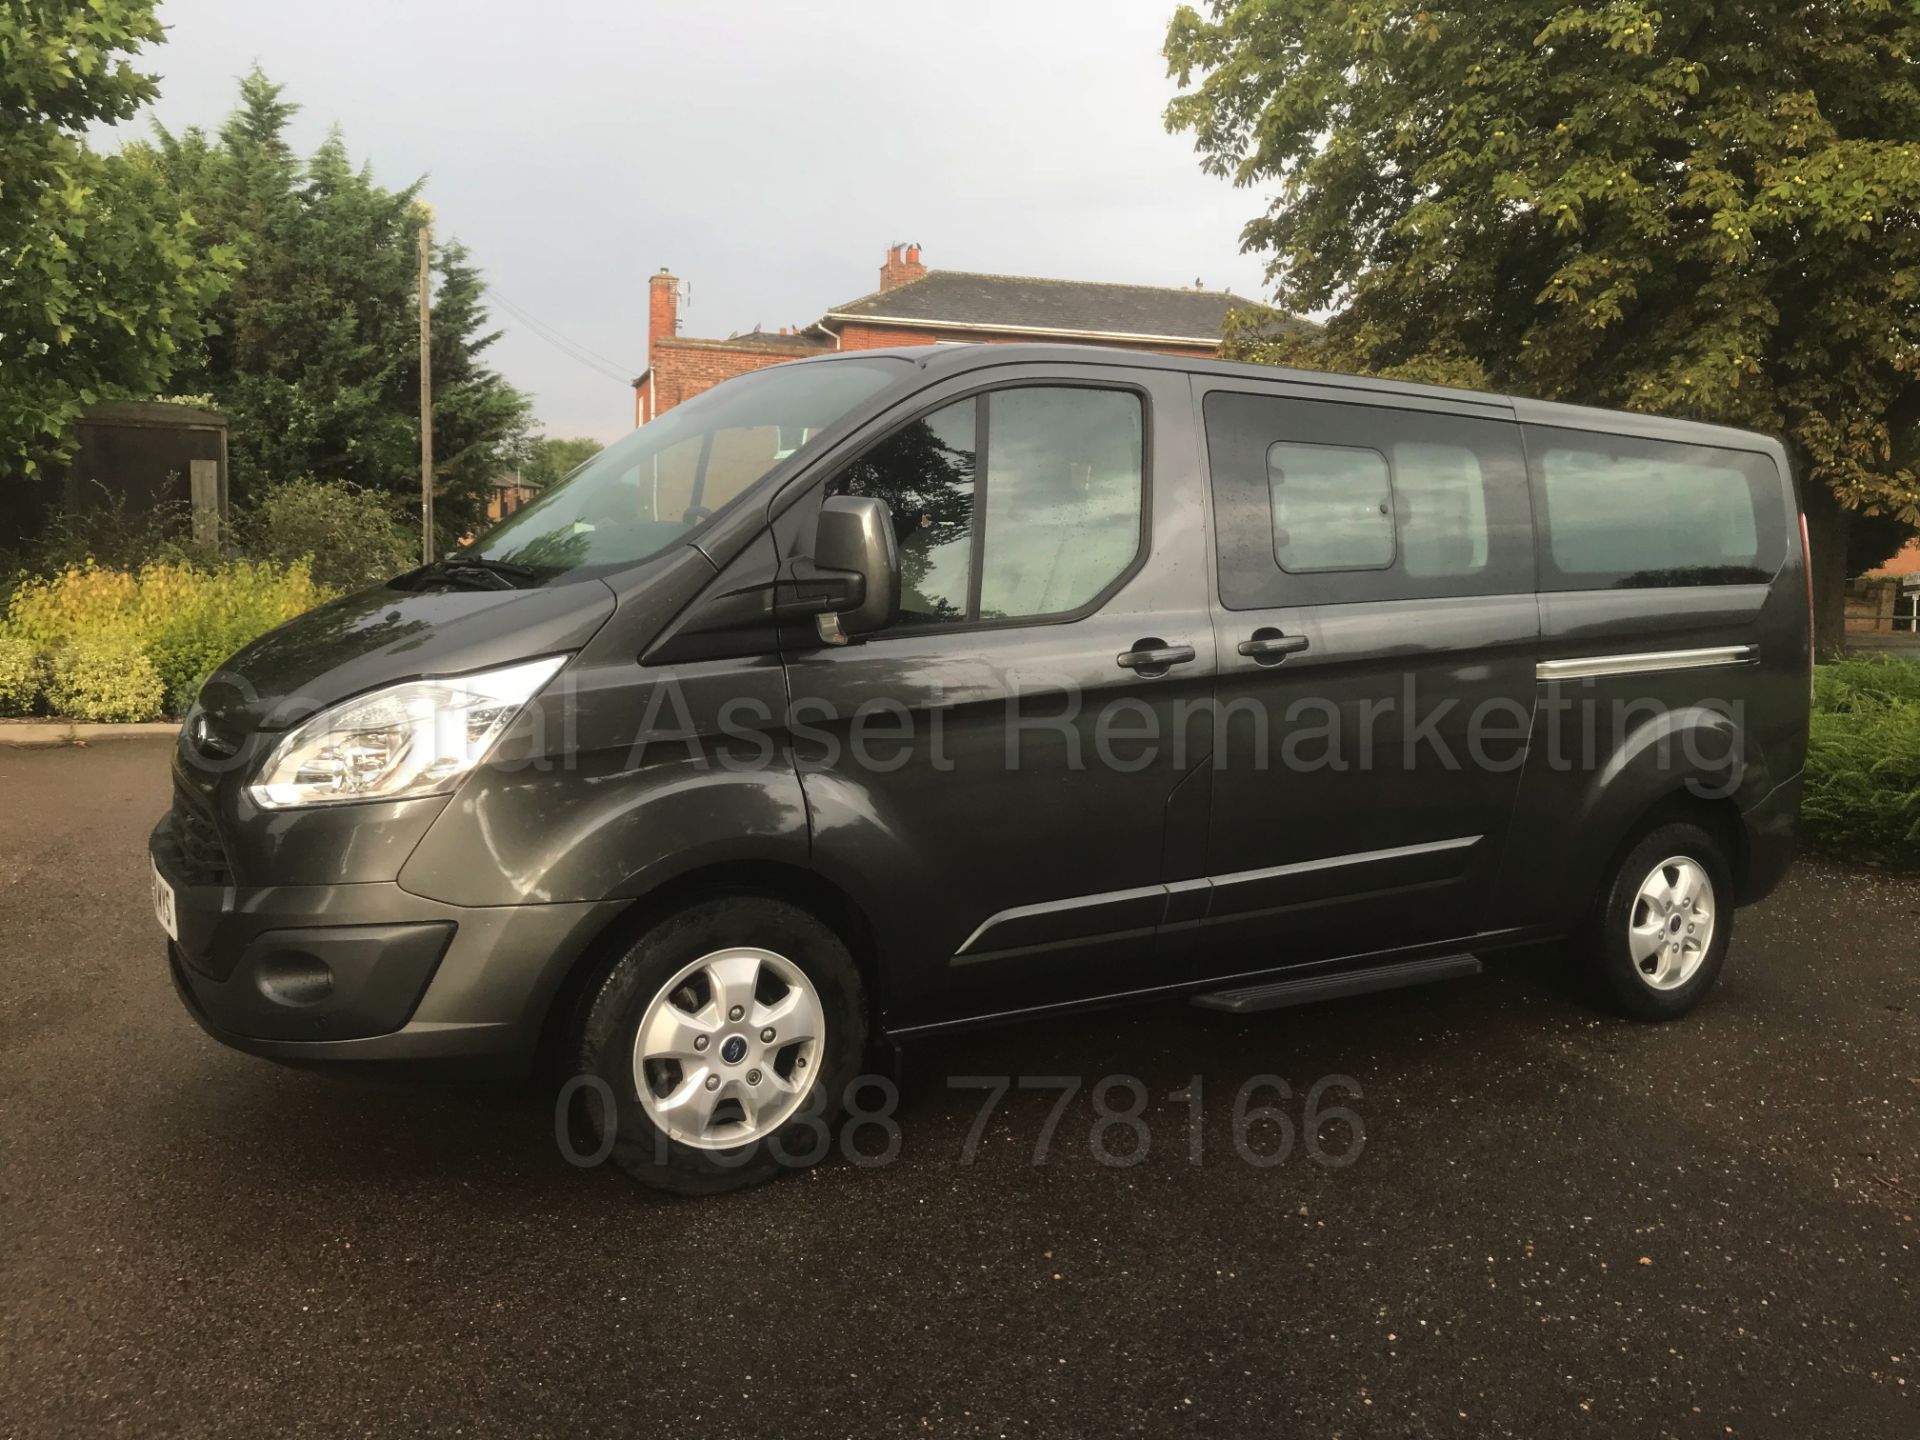 FORD TRANSIT 'TOURNEO' *TITANIUM EDITION* (2018) *9 SEATER MPV* '2.0 TDCI - 6 SPEED' *LOW MILES* - Image 7 of 62